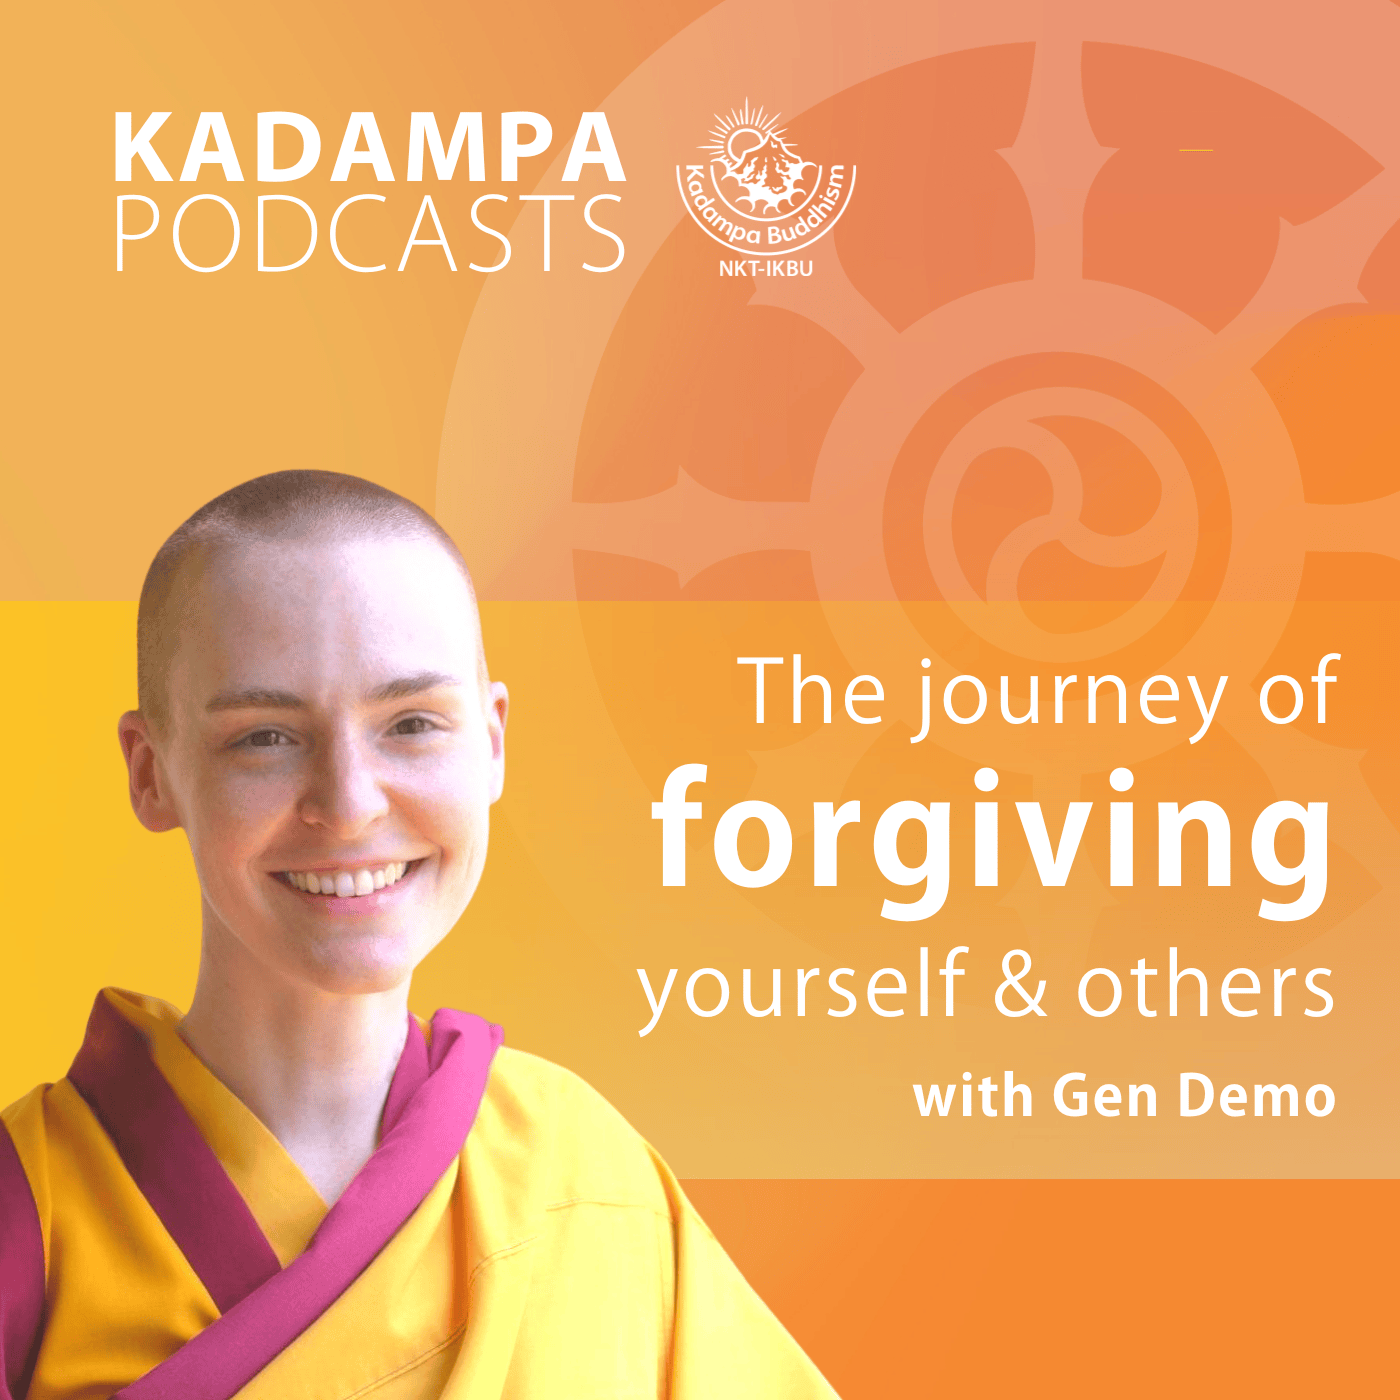 The journey of forgiving ourself and forgiving others